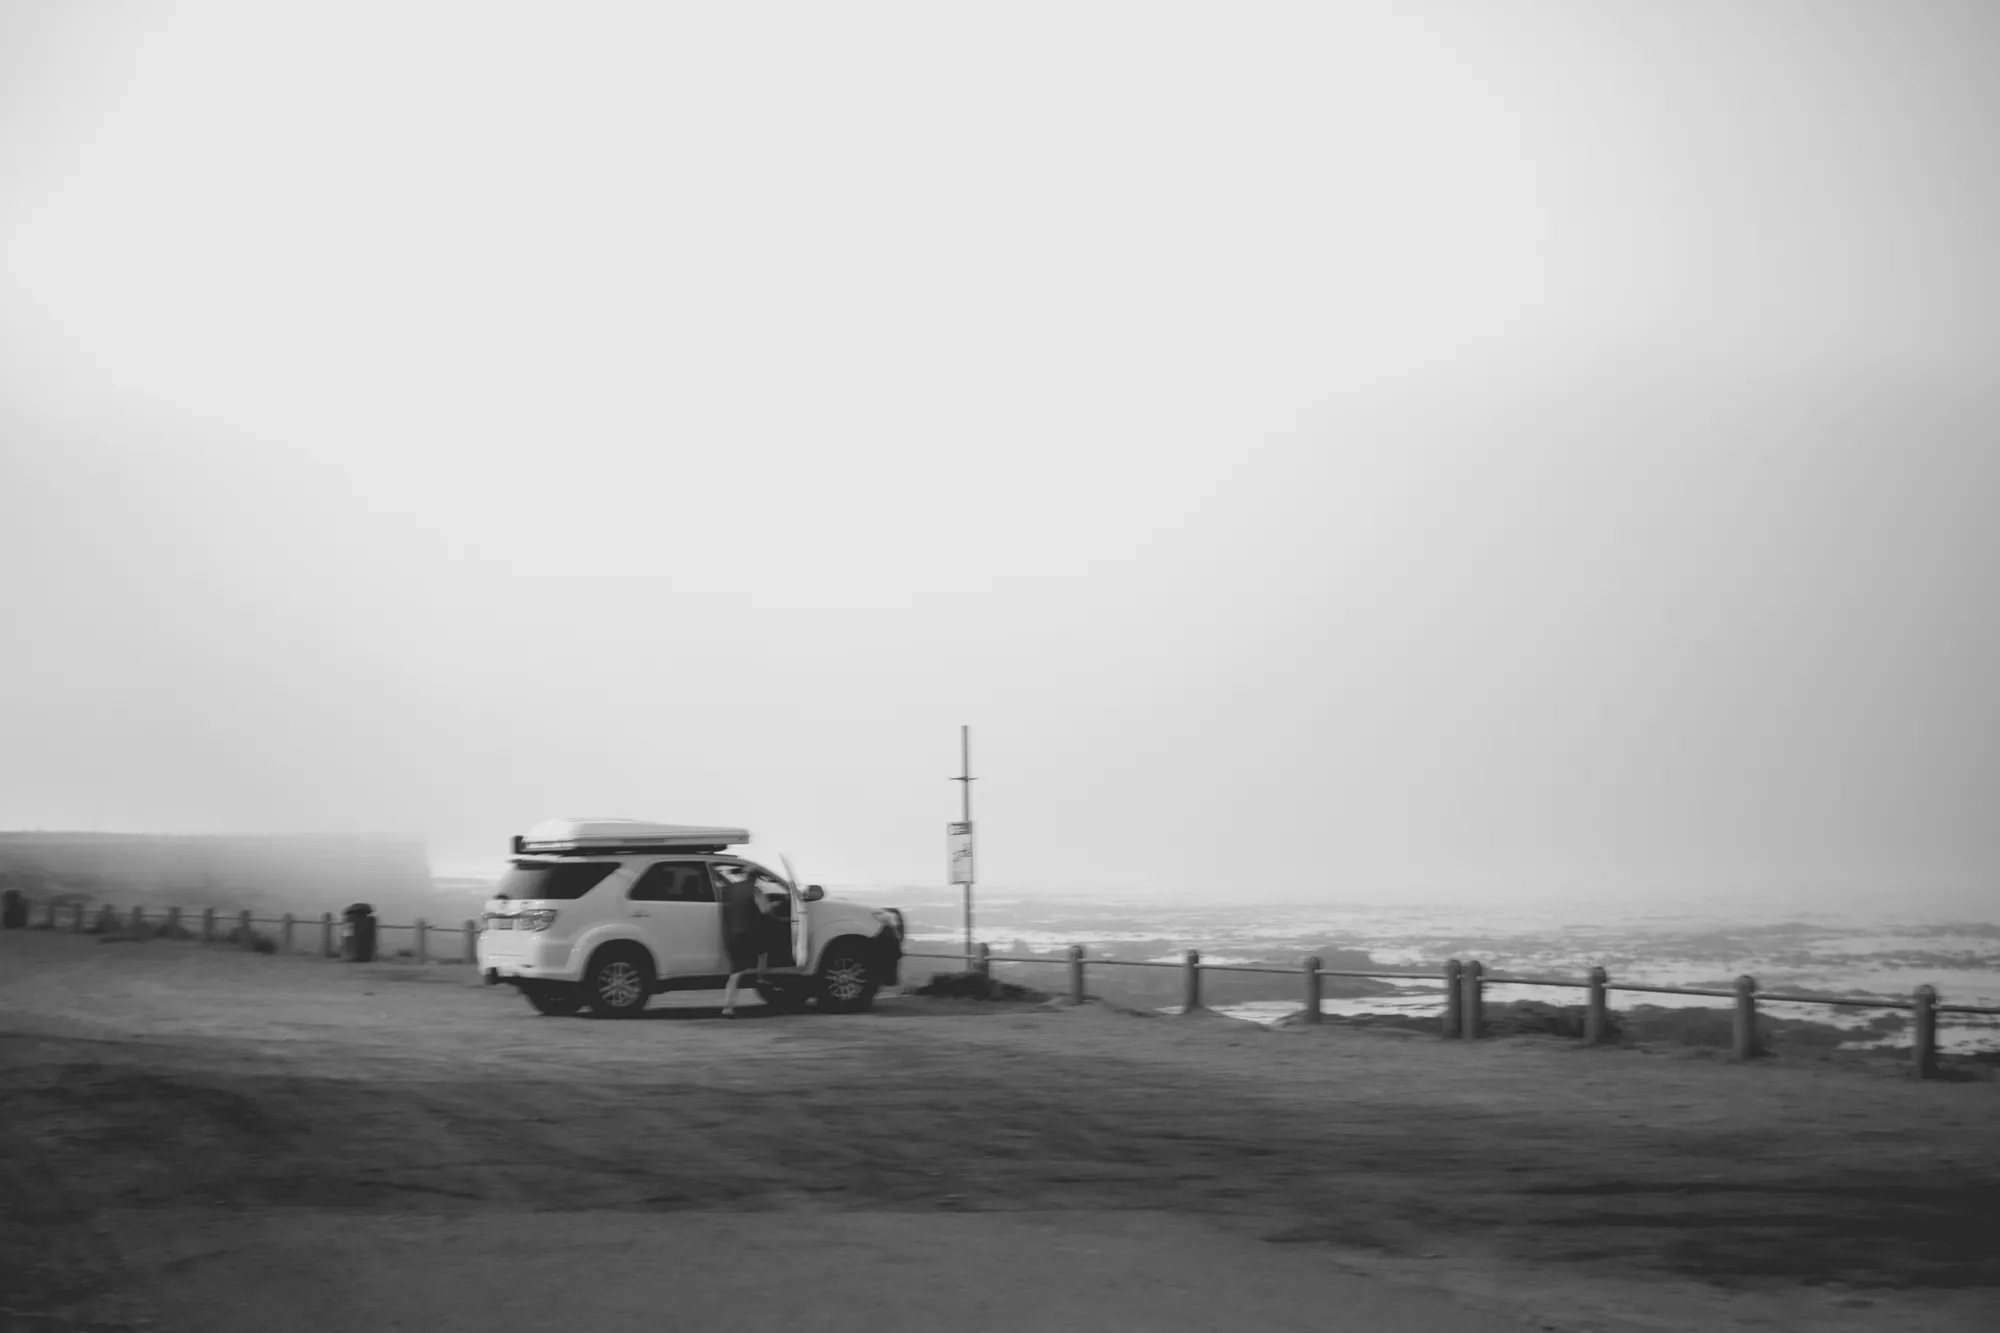 2022-02-15 - Cape Town - Car parked beside beach on misty day